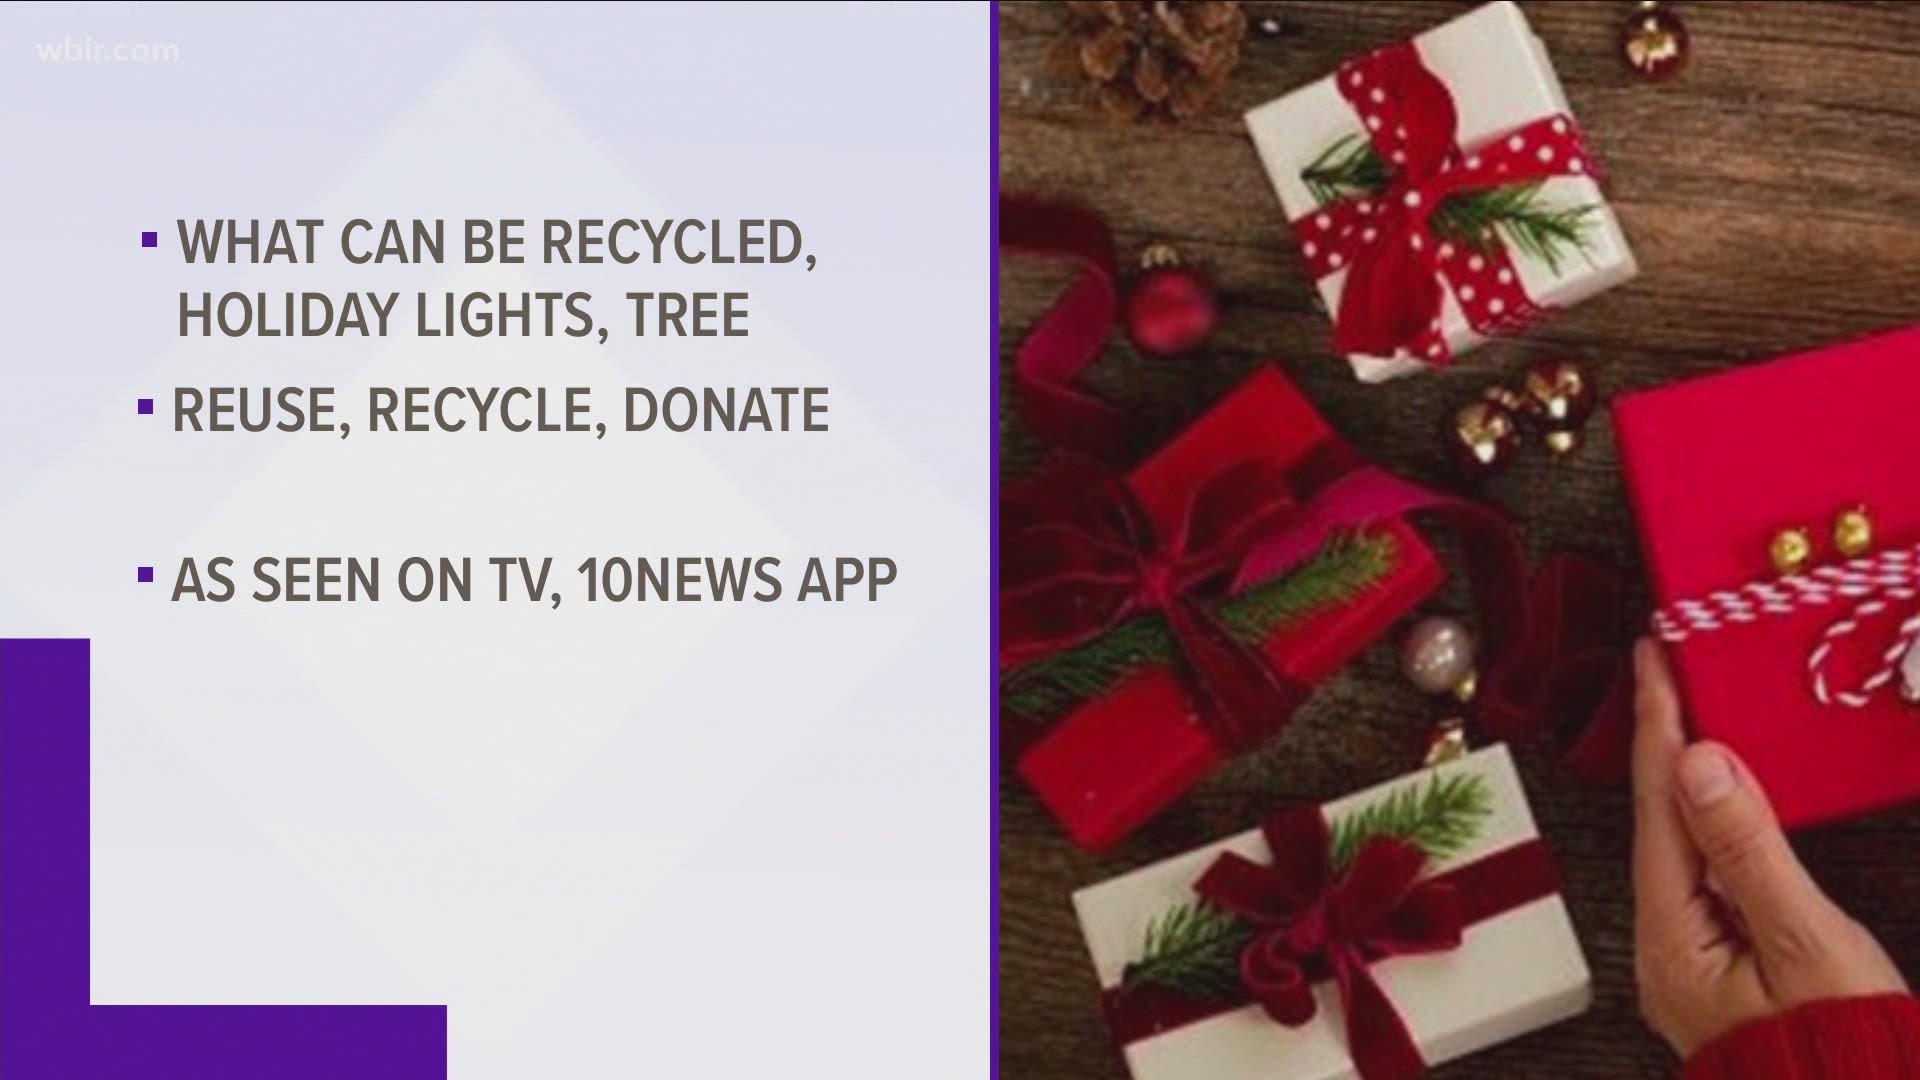 Everything you need to know about recycling at Christmas